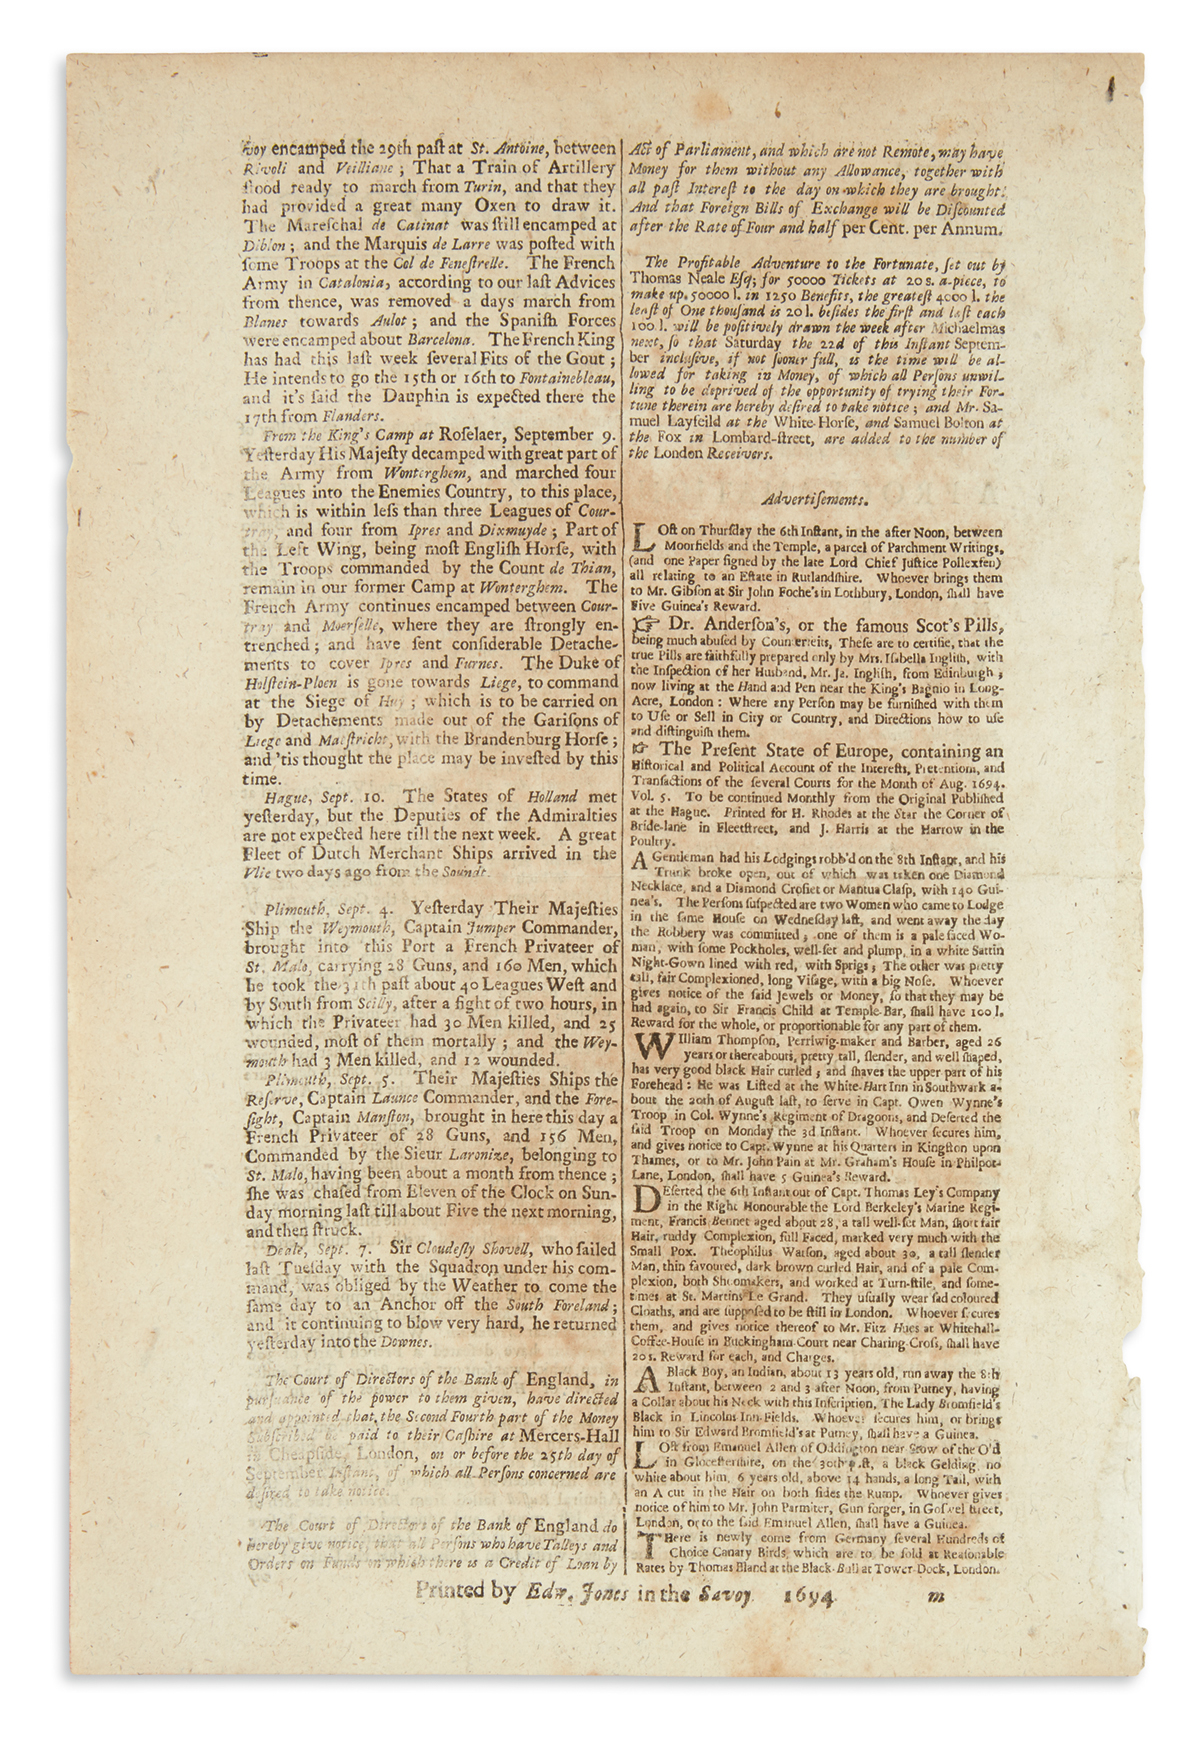 (SLAVERY AND ABOLITION.) Issue of the London Gazette featuring an early runaway slave advertisement for Lady Bromfields Black.